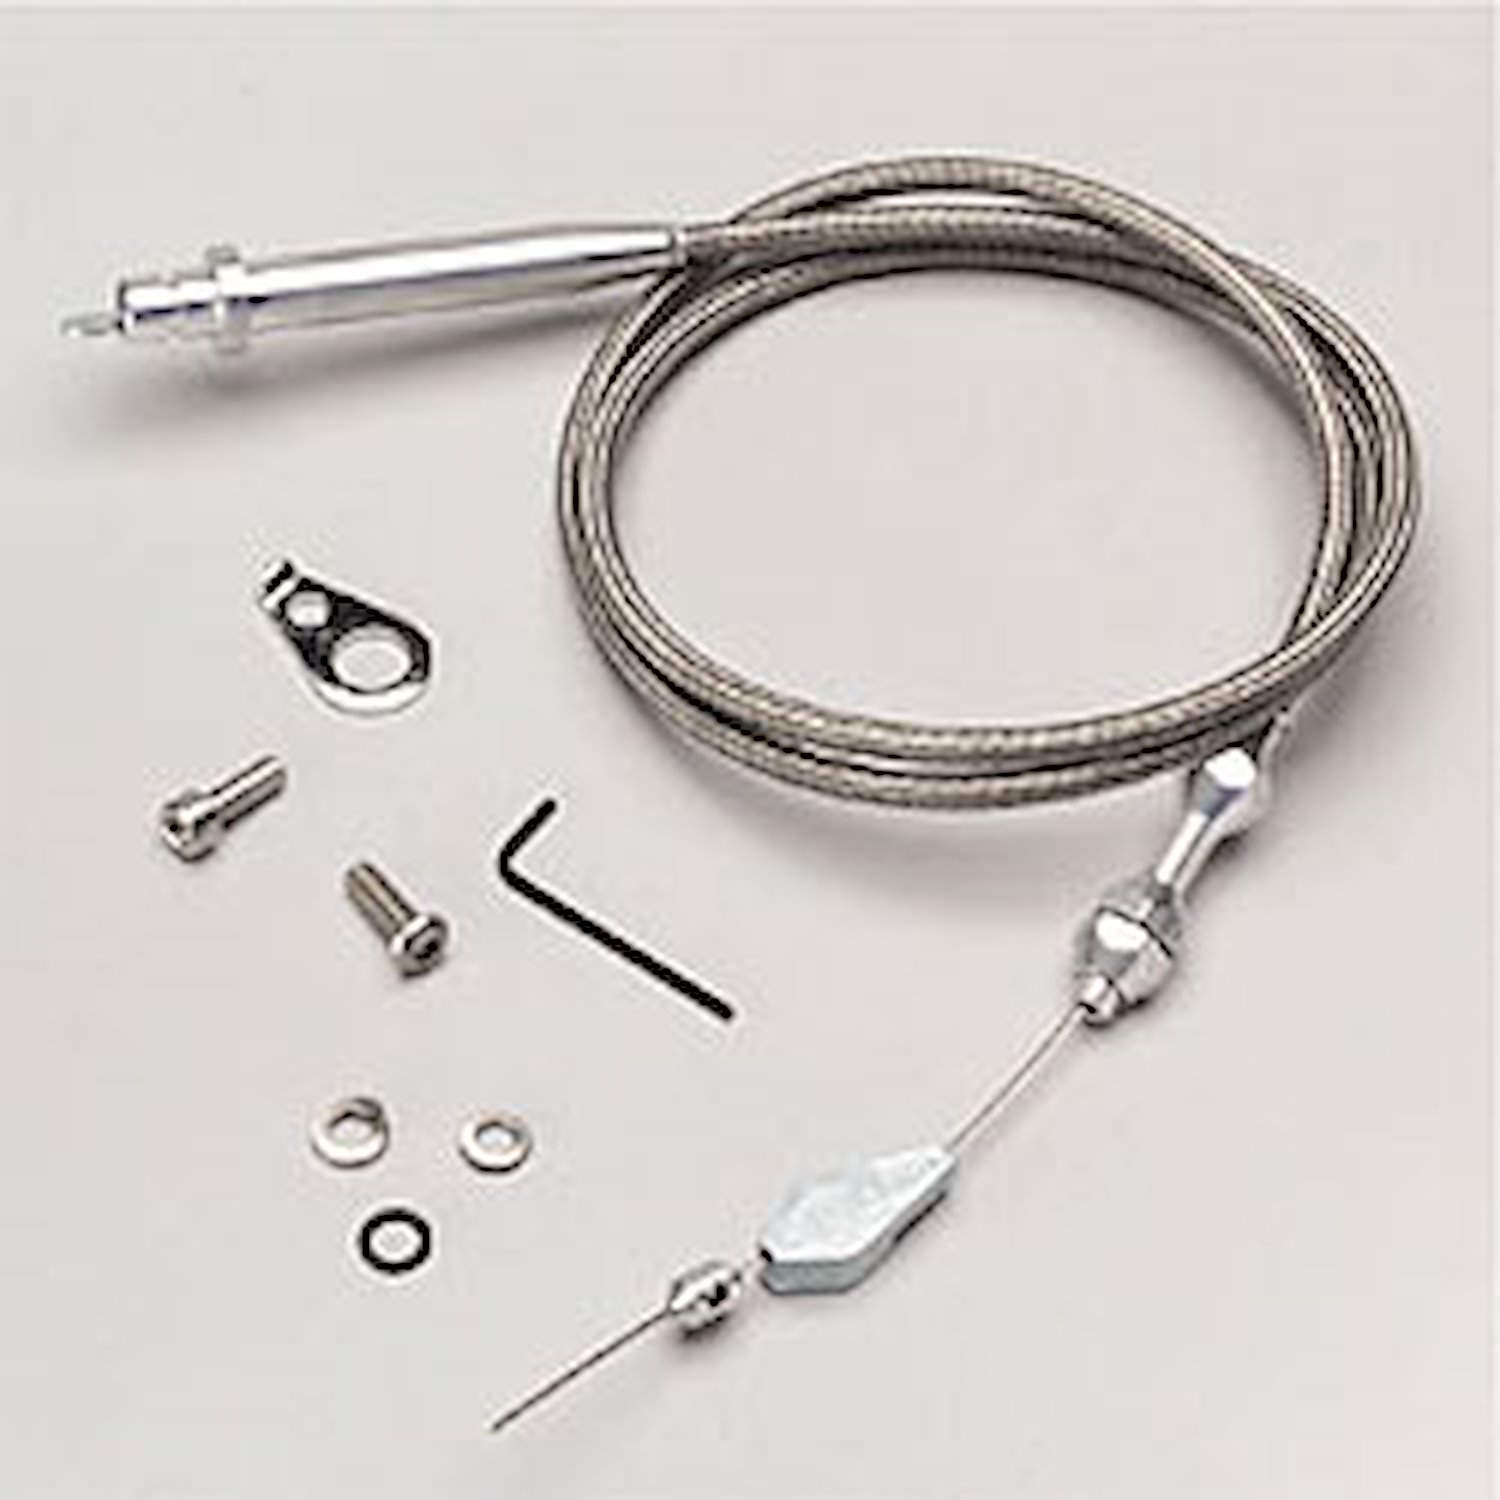 GM TH350 Tuned Port Stainless Steel Kickdown Cable Kit Brushed Finish Aluminum Fittings and Ferrule